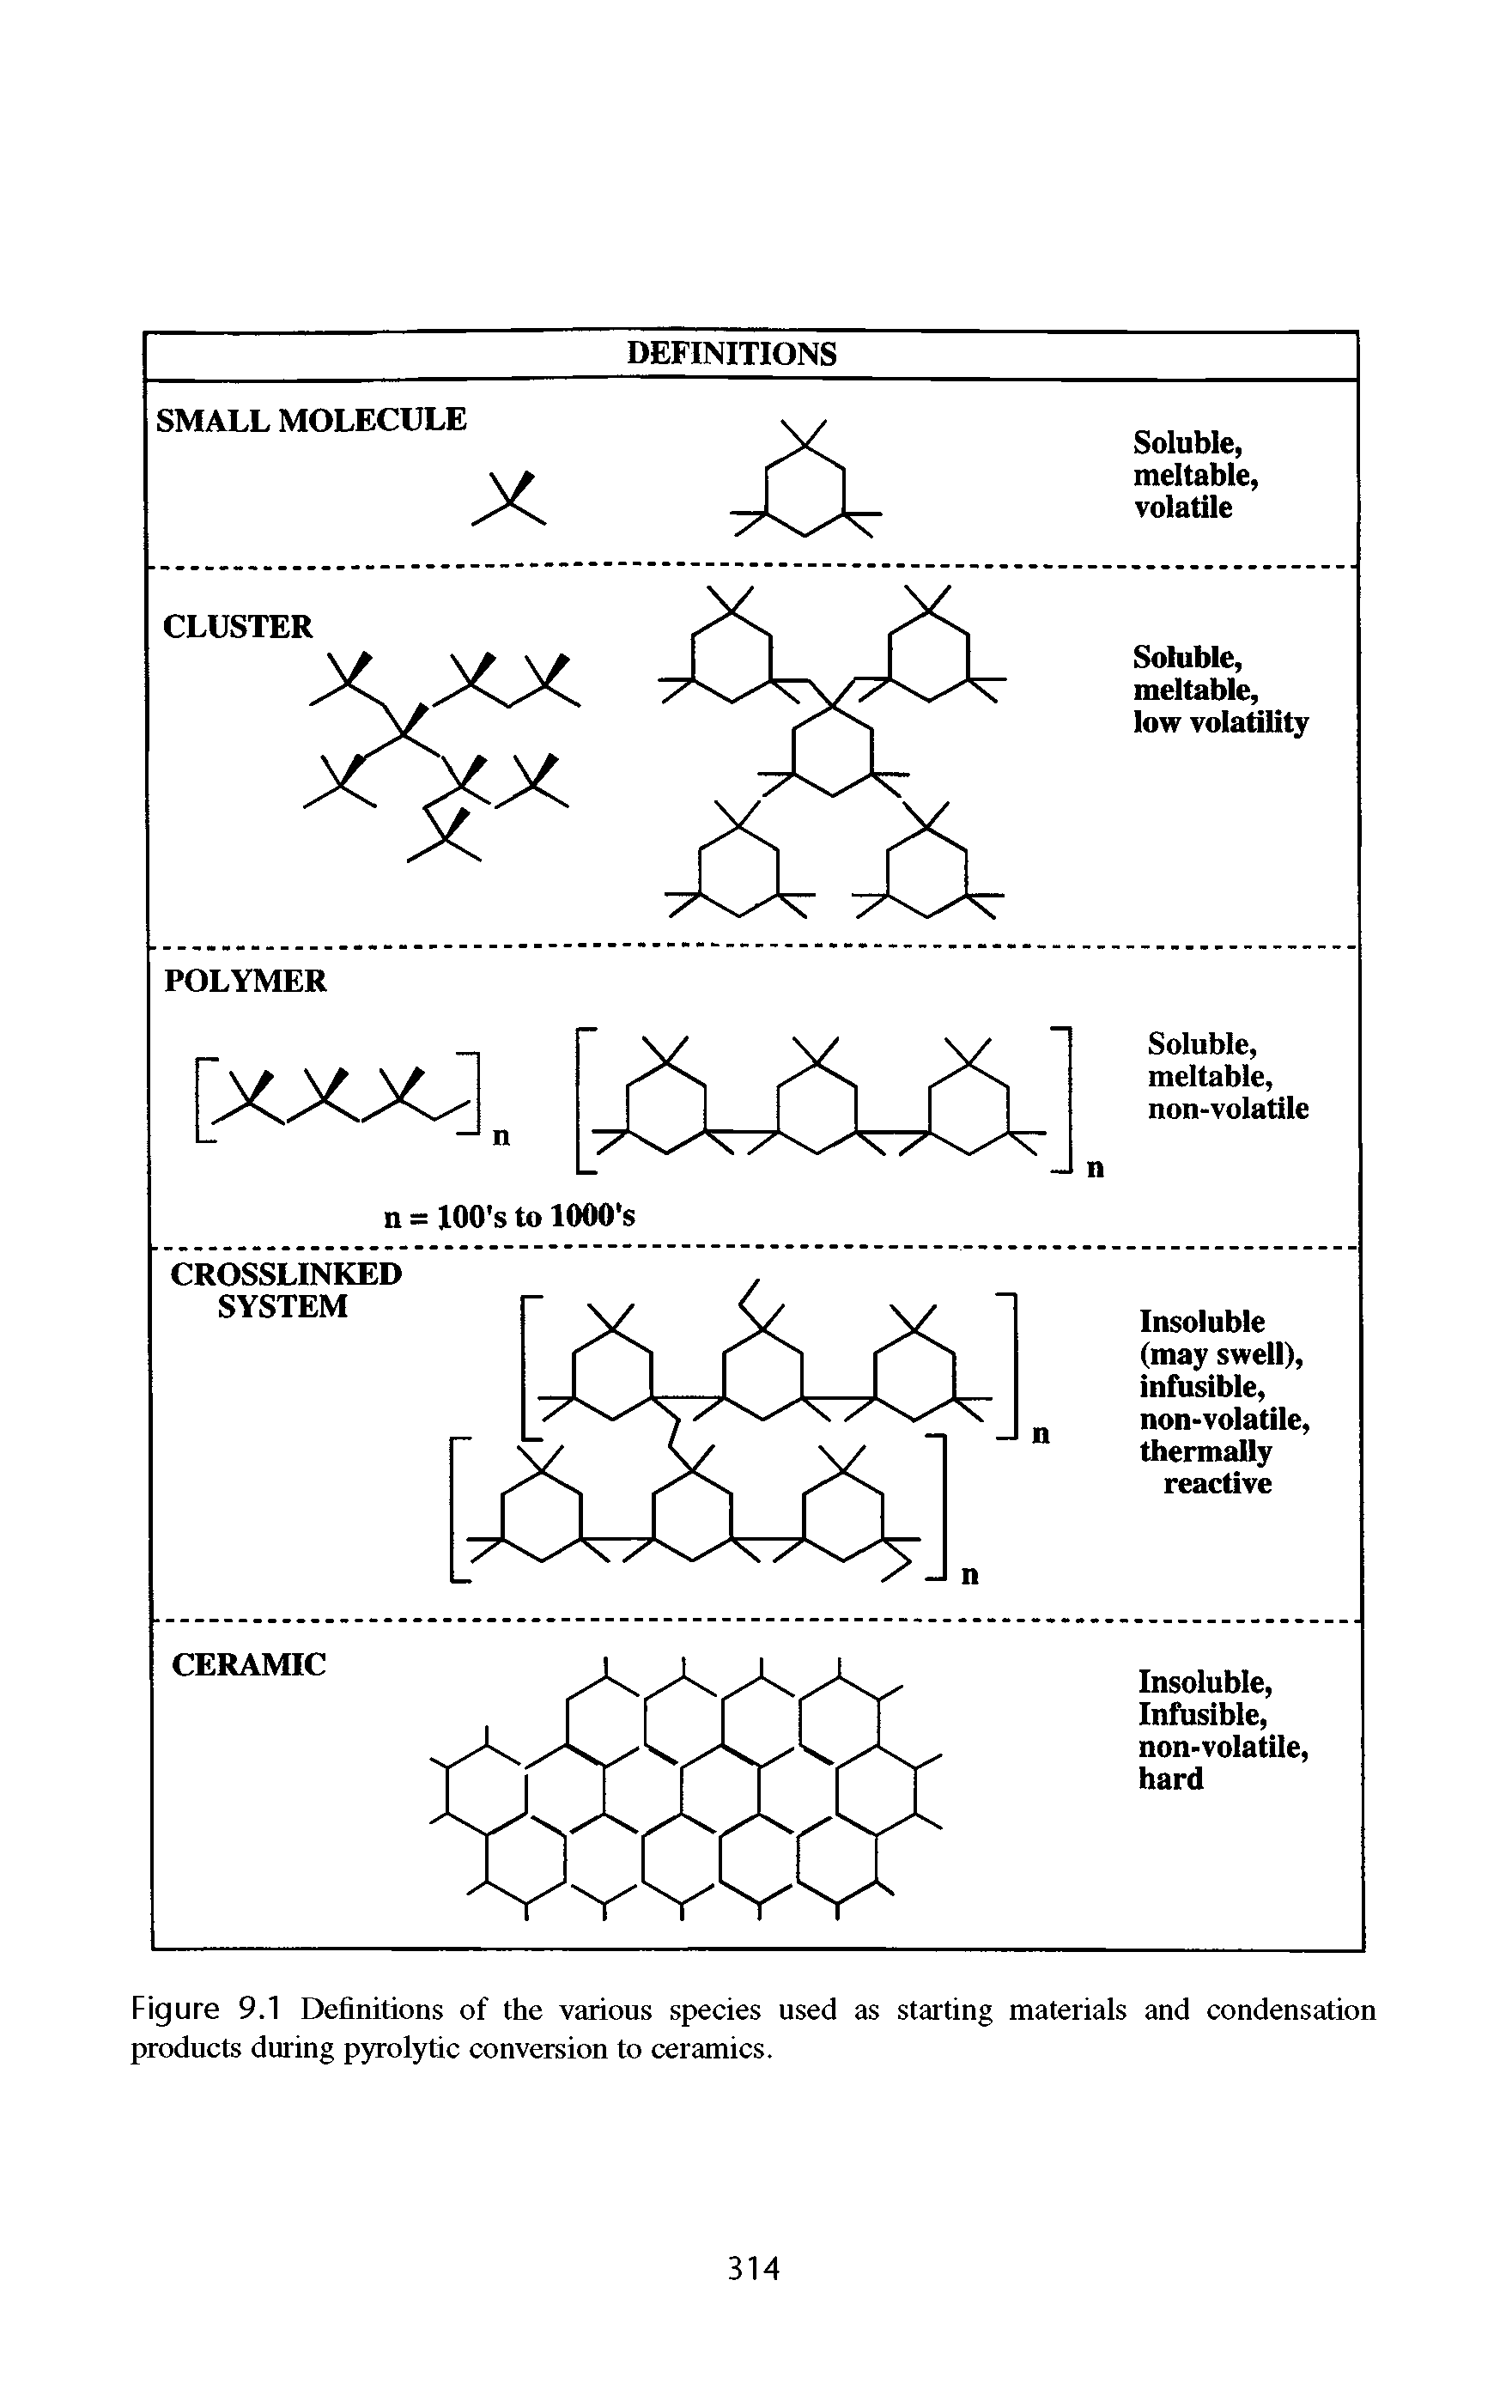 Figure 9.1 Definitions of the various species used as starting materials and condensation products during pyrolytic conversion to ceramics.